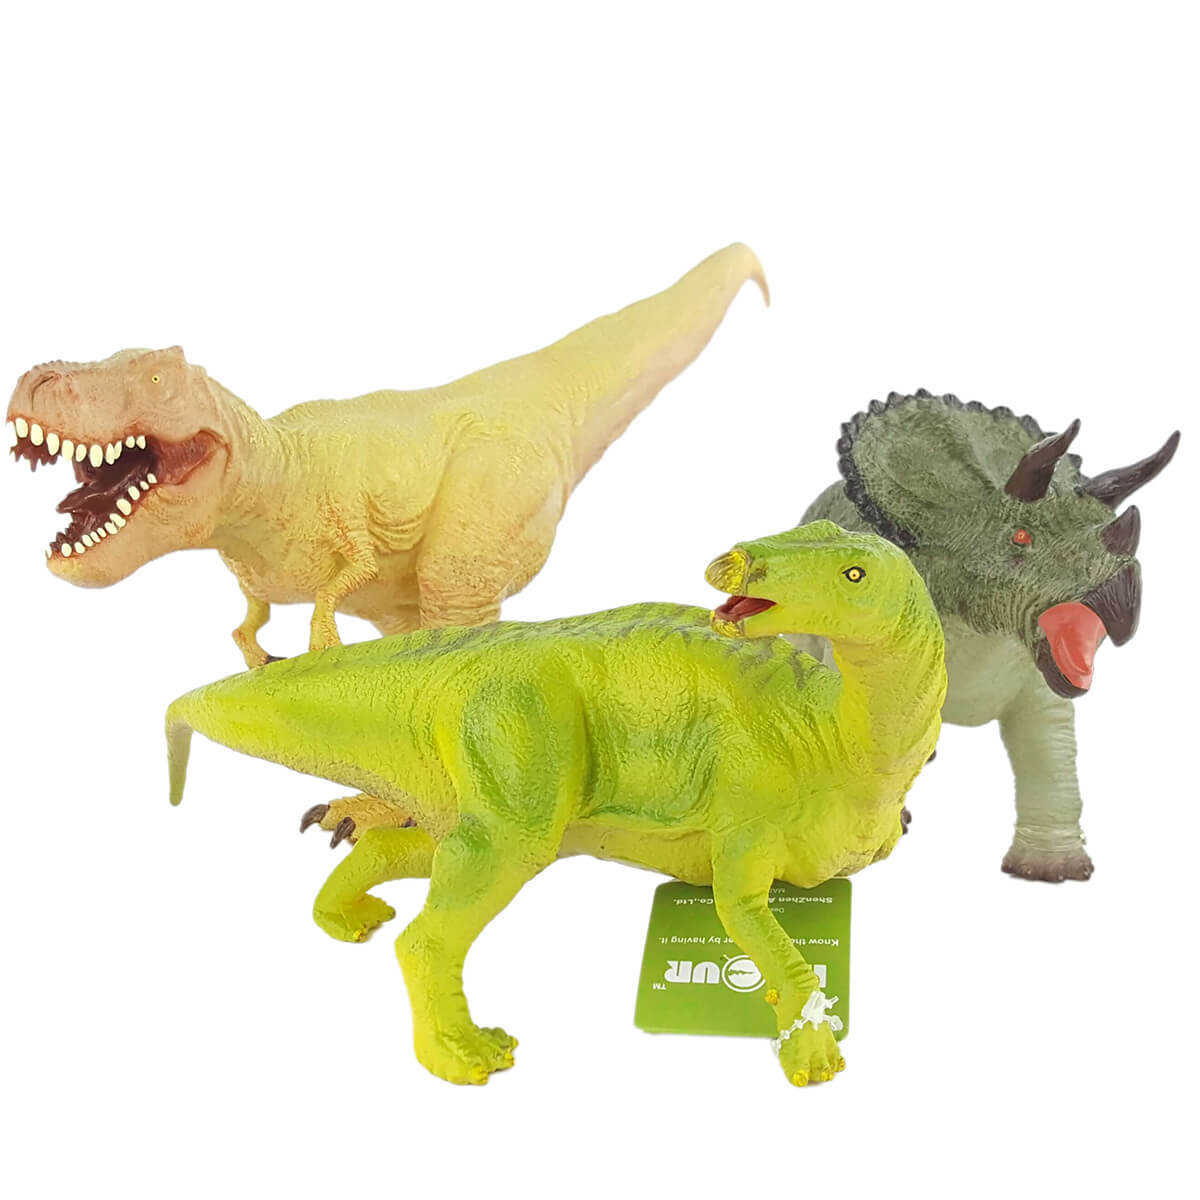 Cretaceous Period Dinosaur Toys 3 Pack additional image